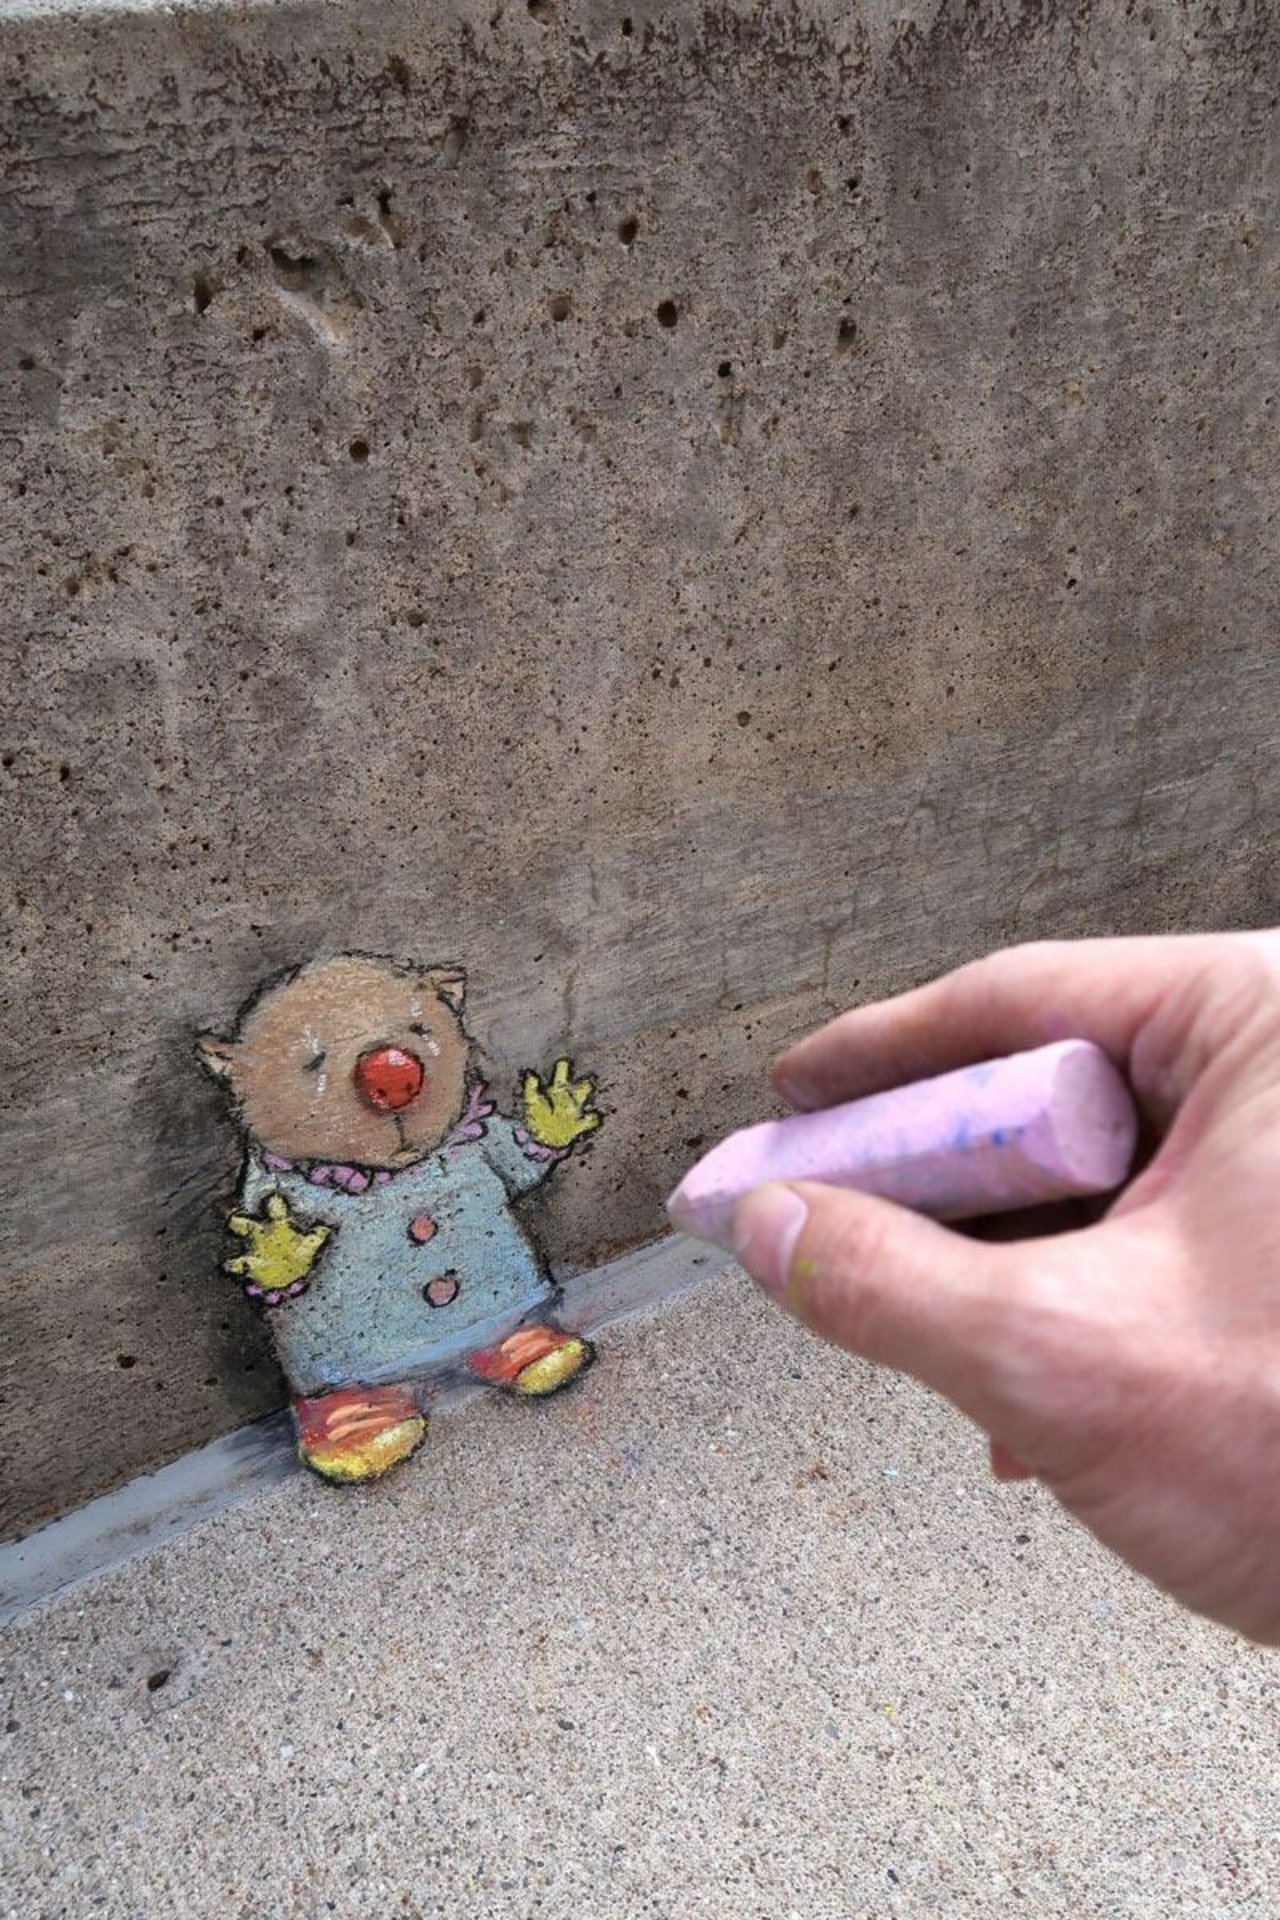 He was on board at the beginning, but Sasha is finally fed up with all the clowning around. #streetart #chalkart https://t.co/xjBHSNrthU